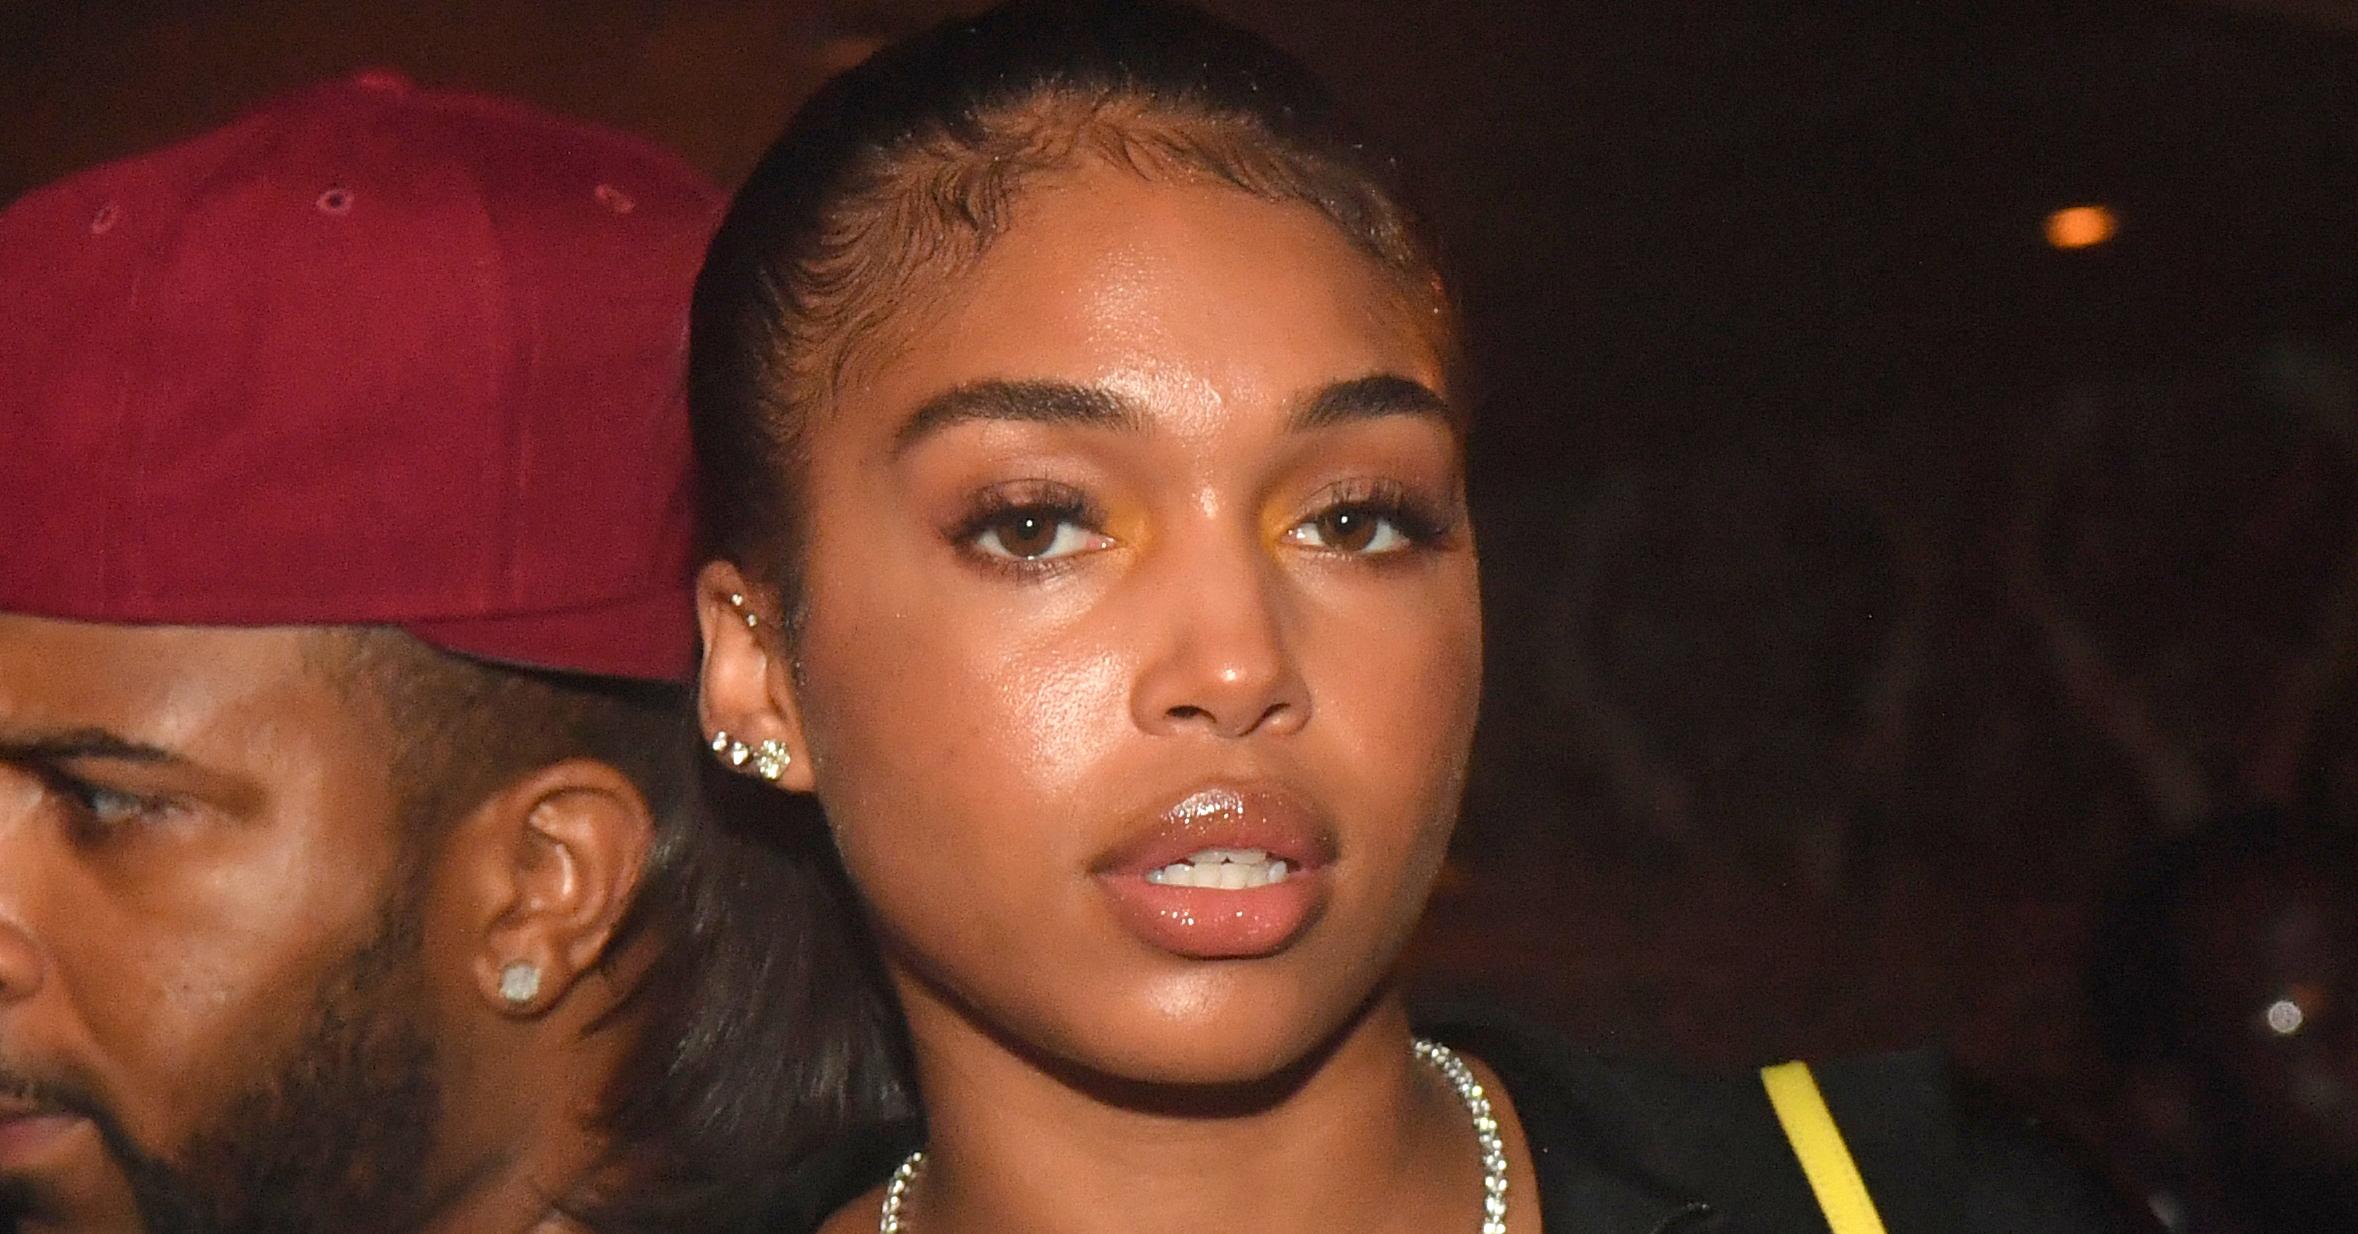 Lori Harvey S Boyfriend List The Model Has Dated These Famous Men Jordan's bio is filled with personal and professional info. lori harvey s boyfriend list the model